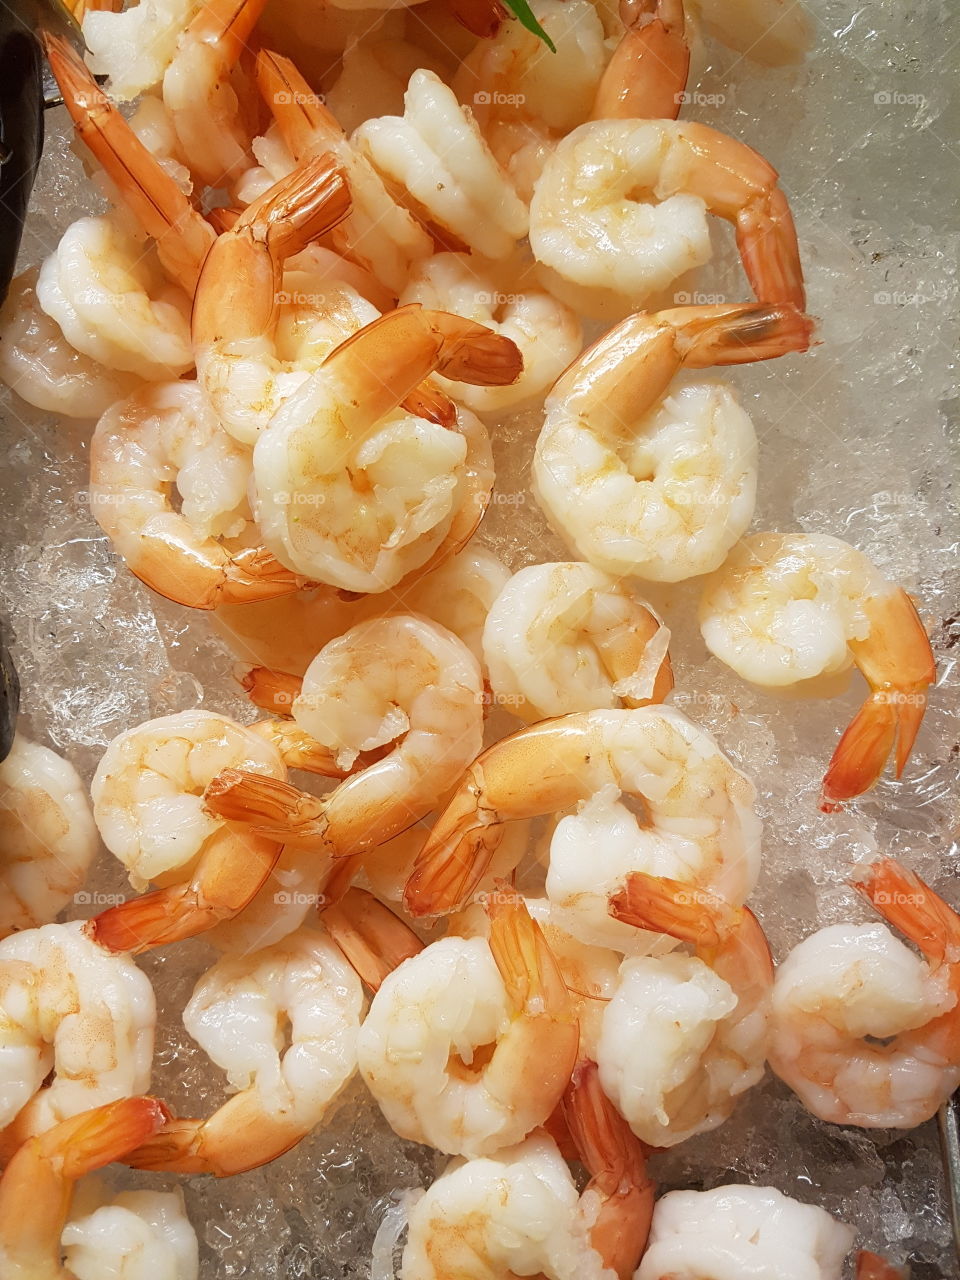 cooked prawns on ice